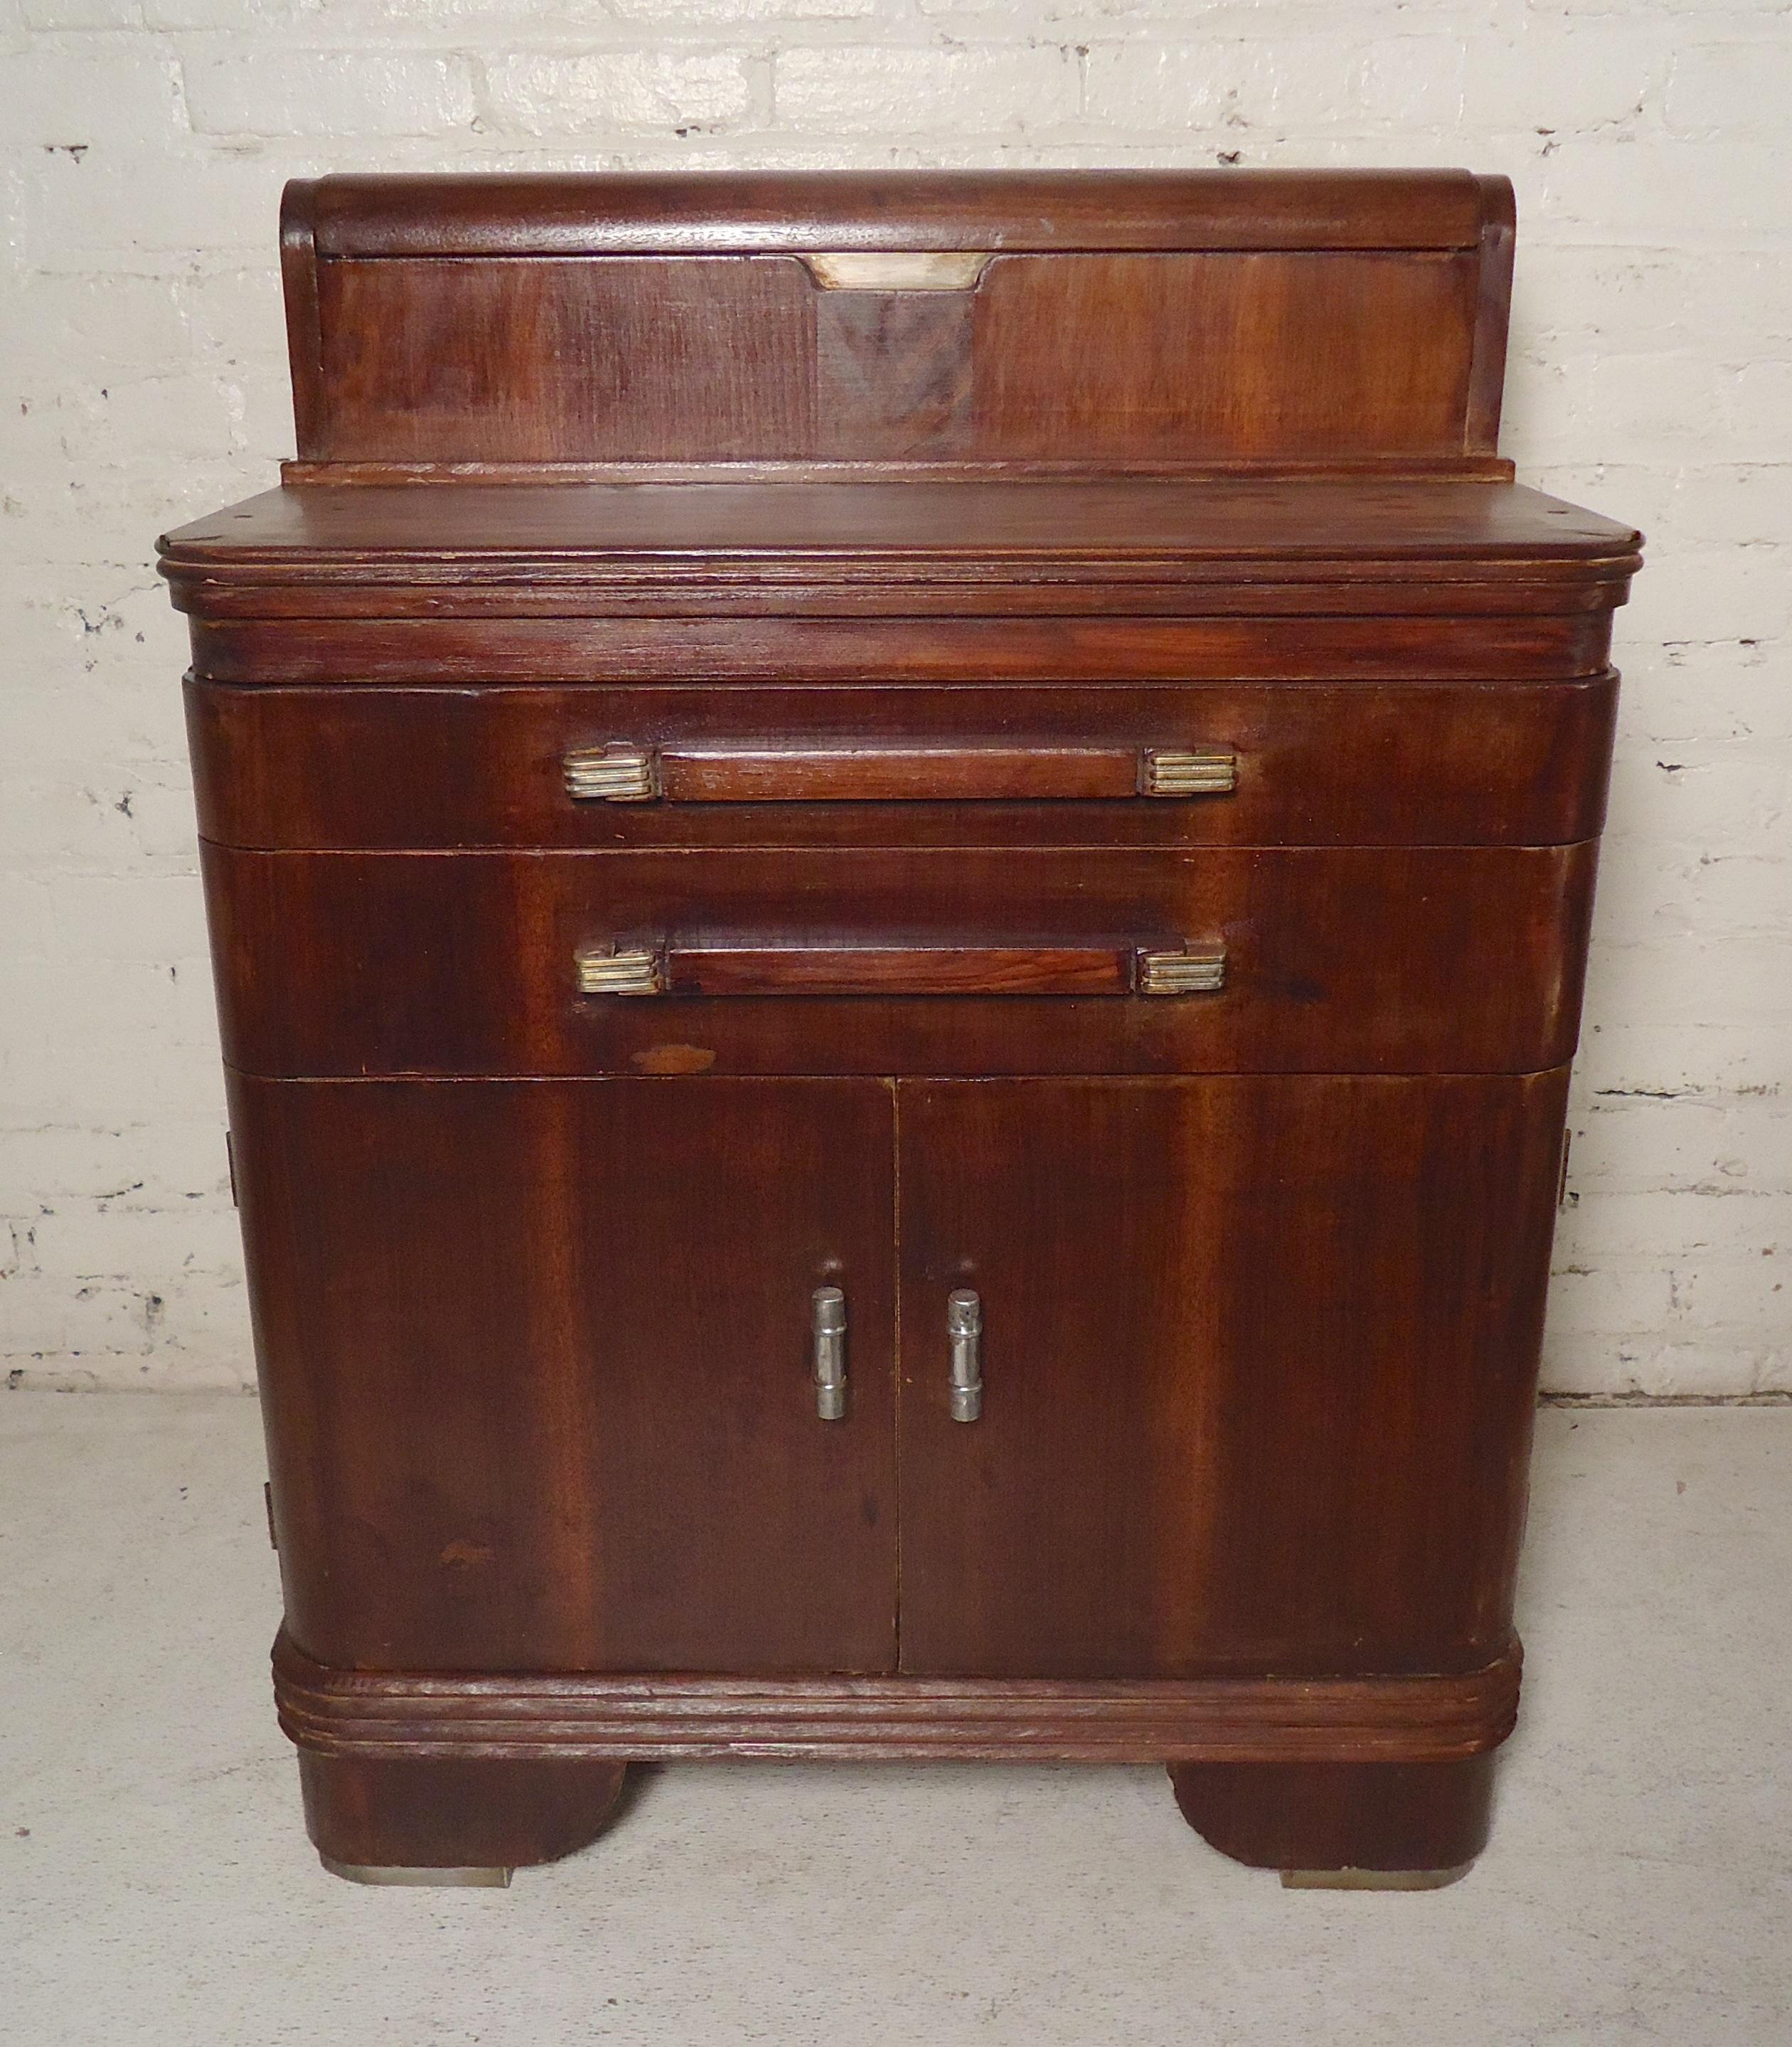 Refinished wood cabinet with storage. Restored for modern cabinet storage.

(Please confirm item location - NY or NJ - with dealer).
  